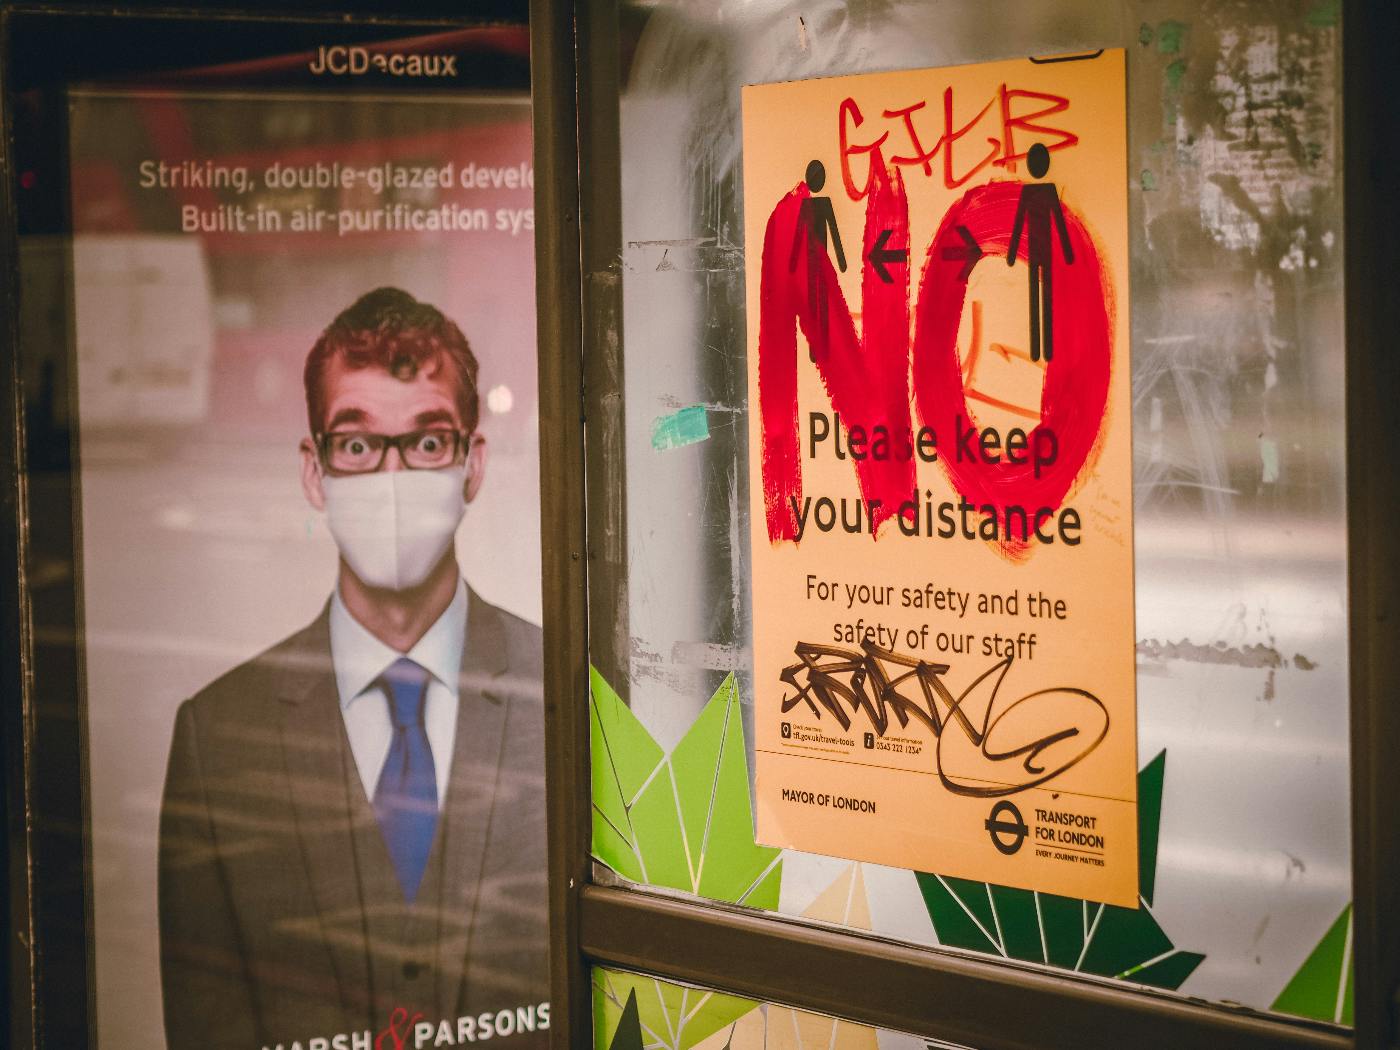 A bus stop with poster ads: one shows a man wearing a mask, another asks fro sociladistancing which someone has written NO in red letters on